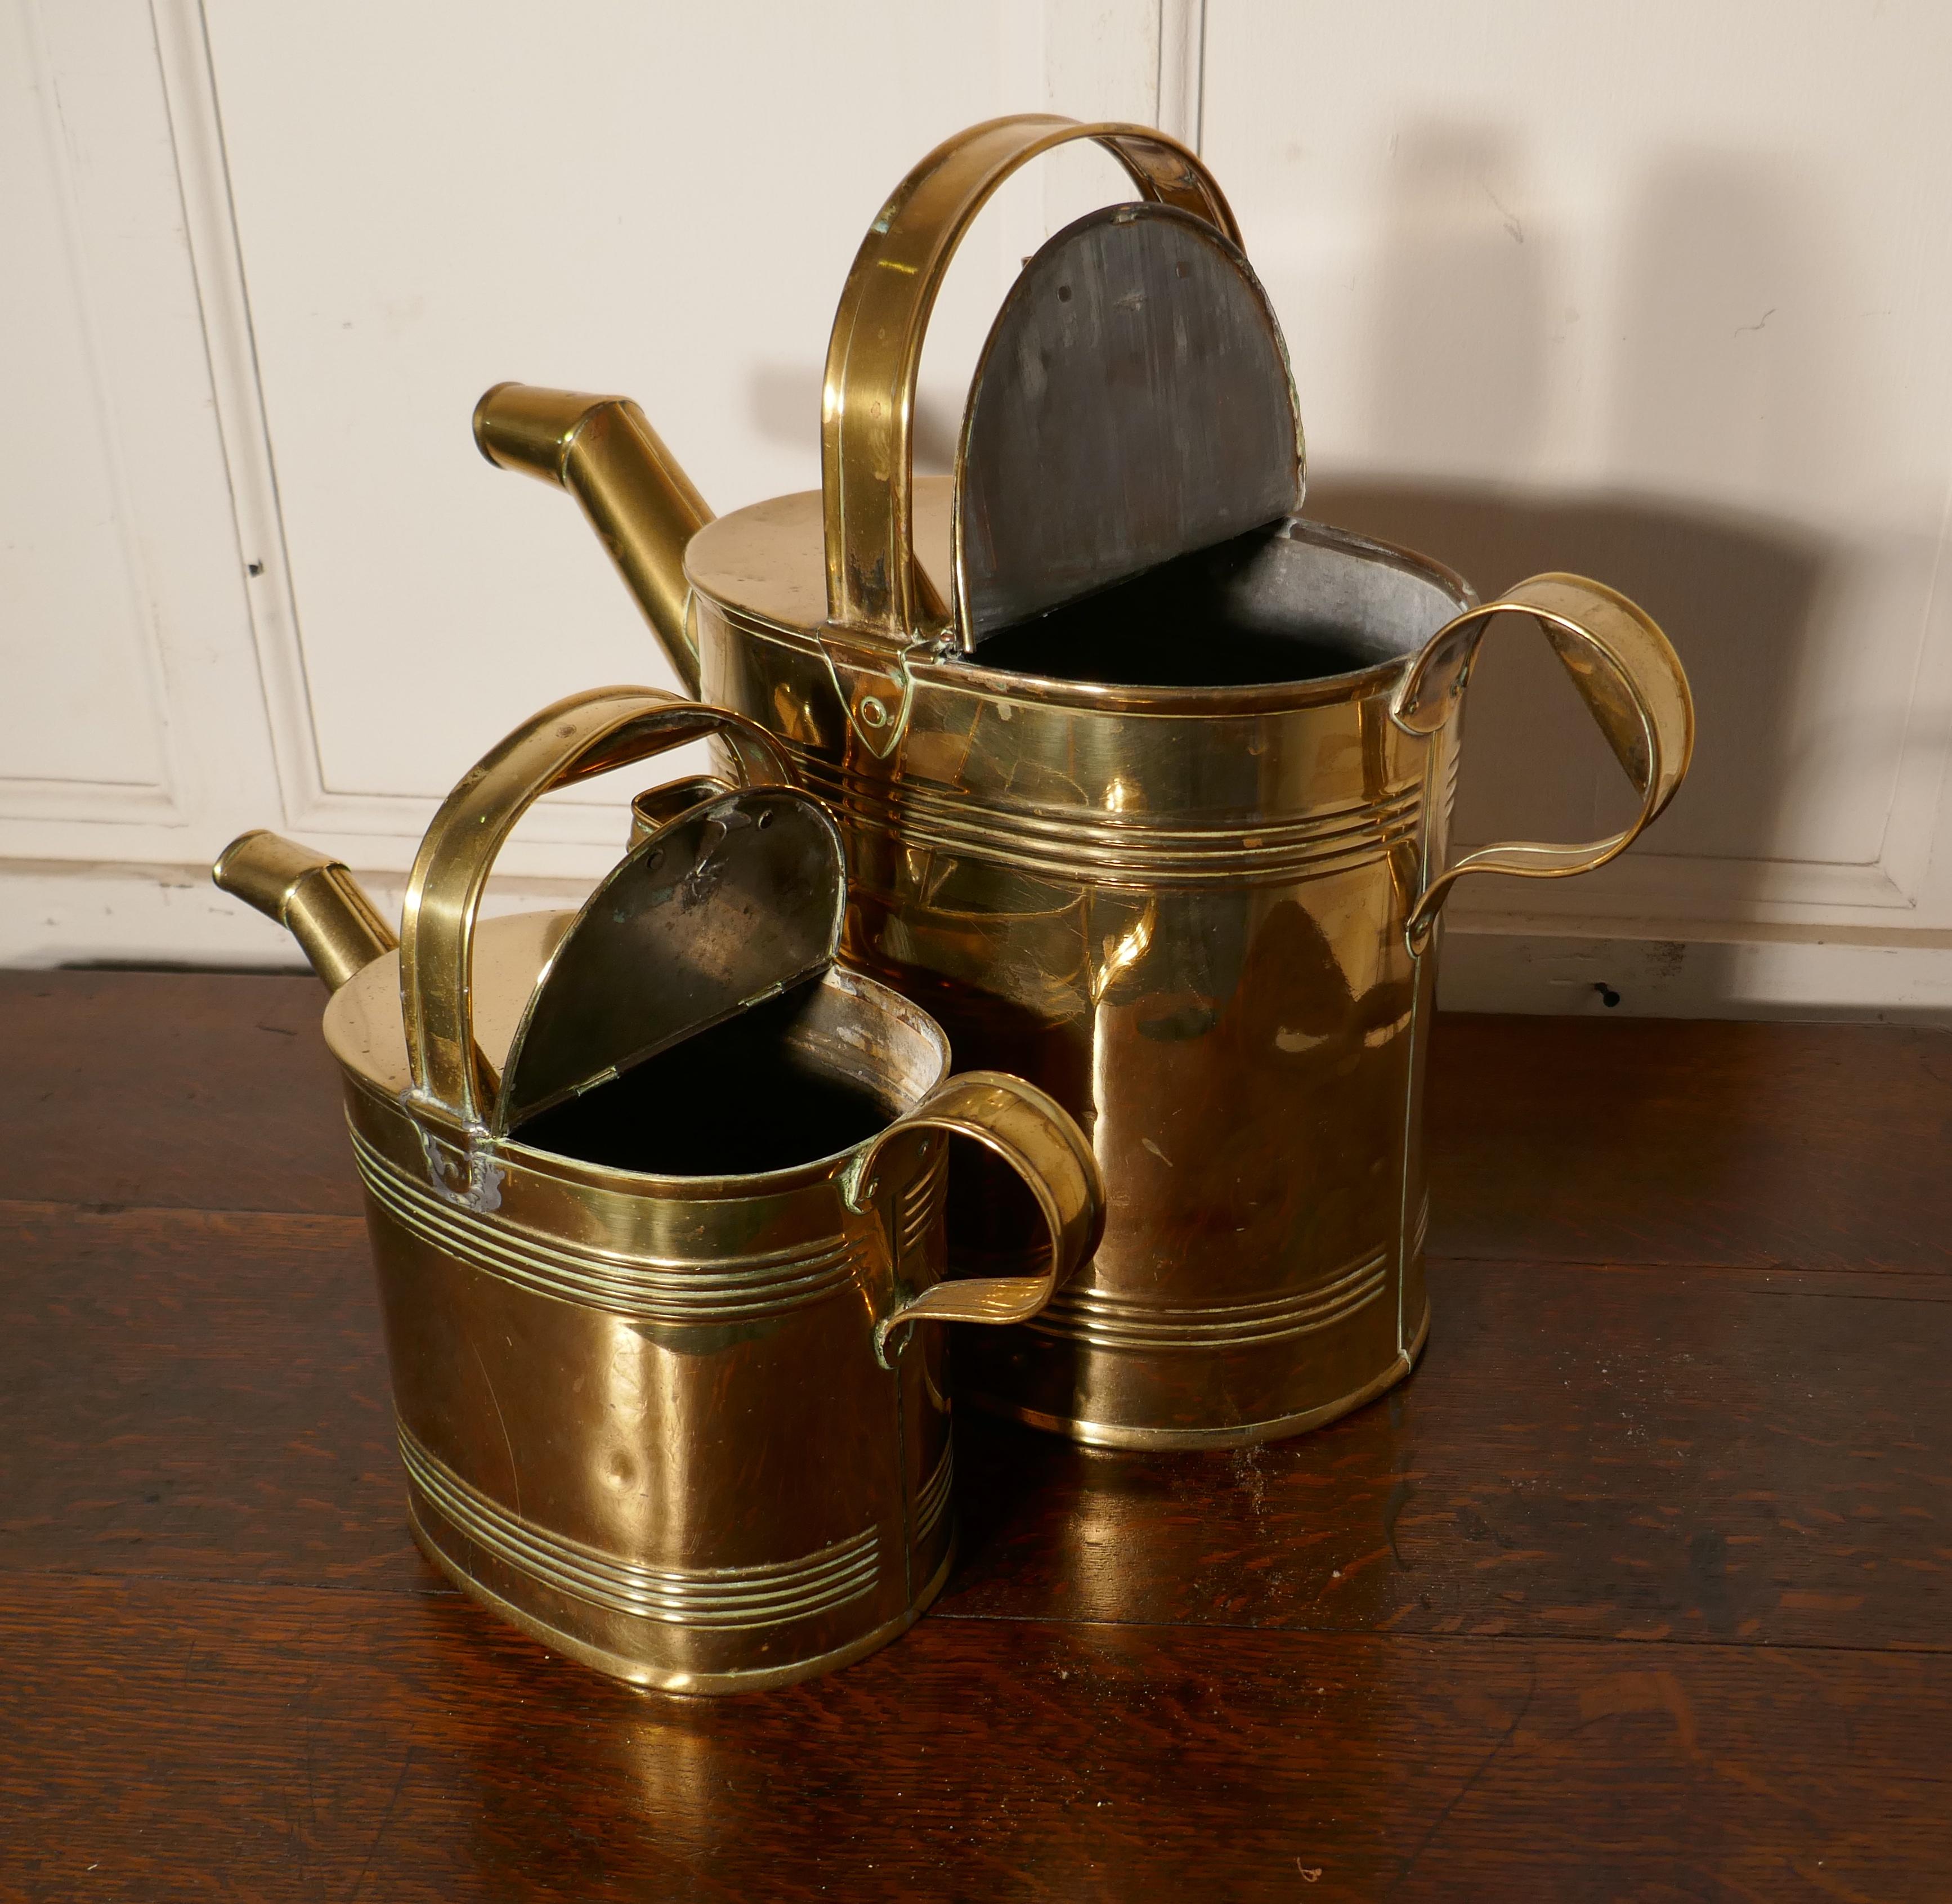 Set of 2 Victorian brass hot water jugs

Both jugs are stamped “Army and Navy Stores, so best quality and very clean
The large Jug is 16” high x 19” long x 8” wide, the smaller is 11” high x 14” long and 5.5” wide.

NH31.
 